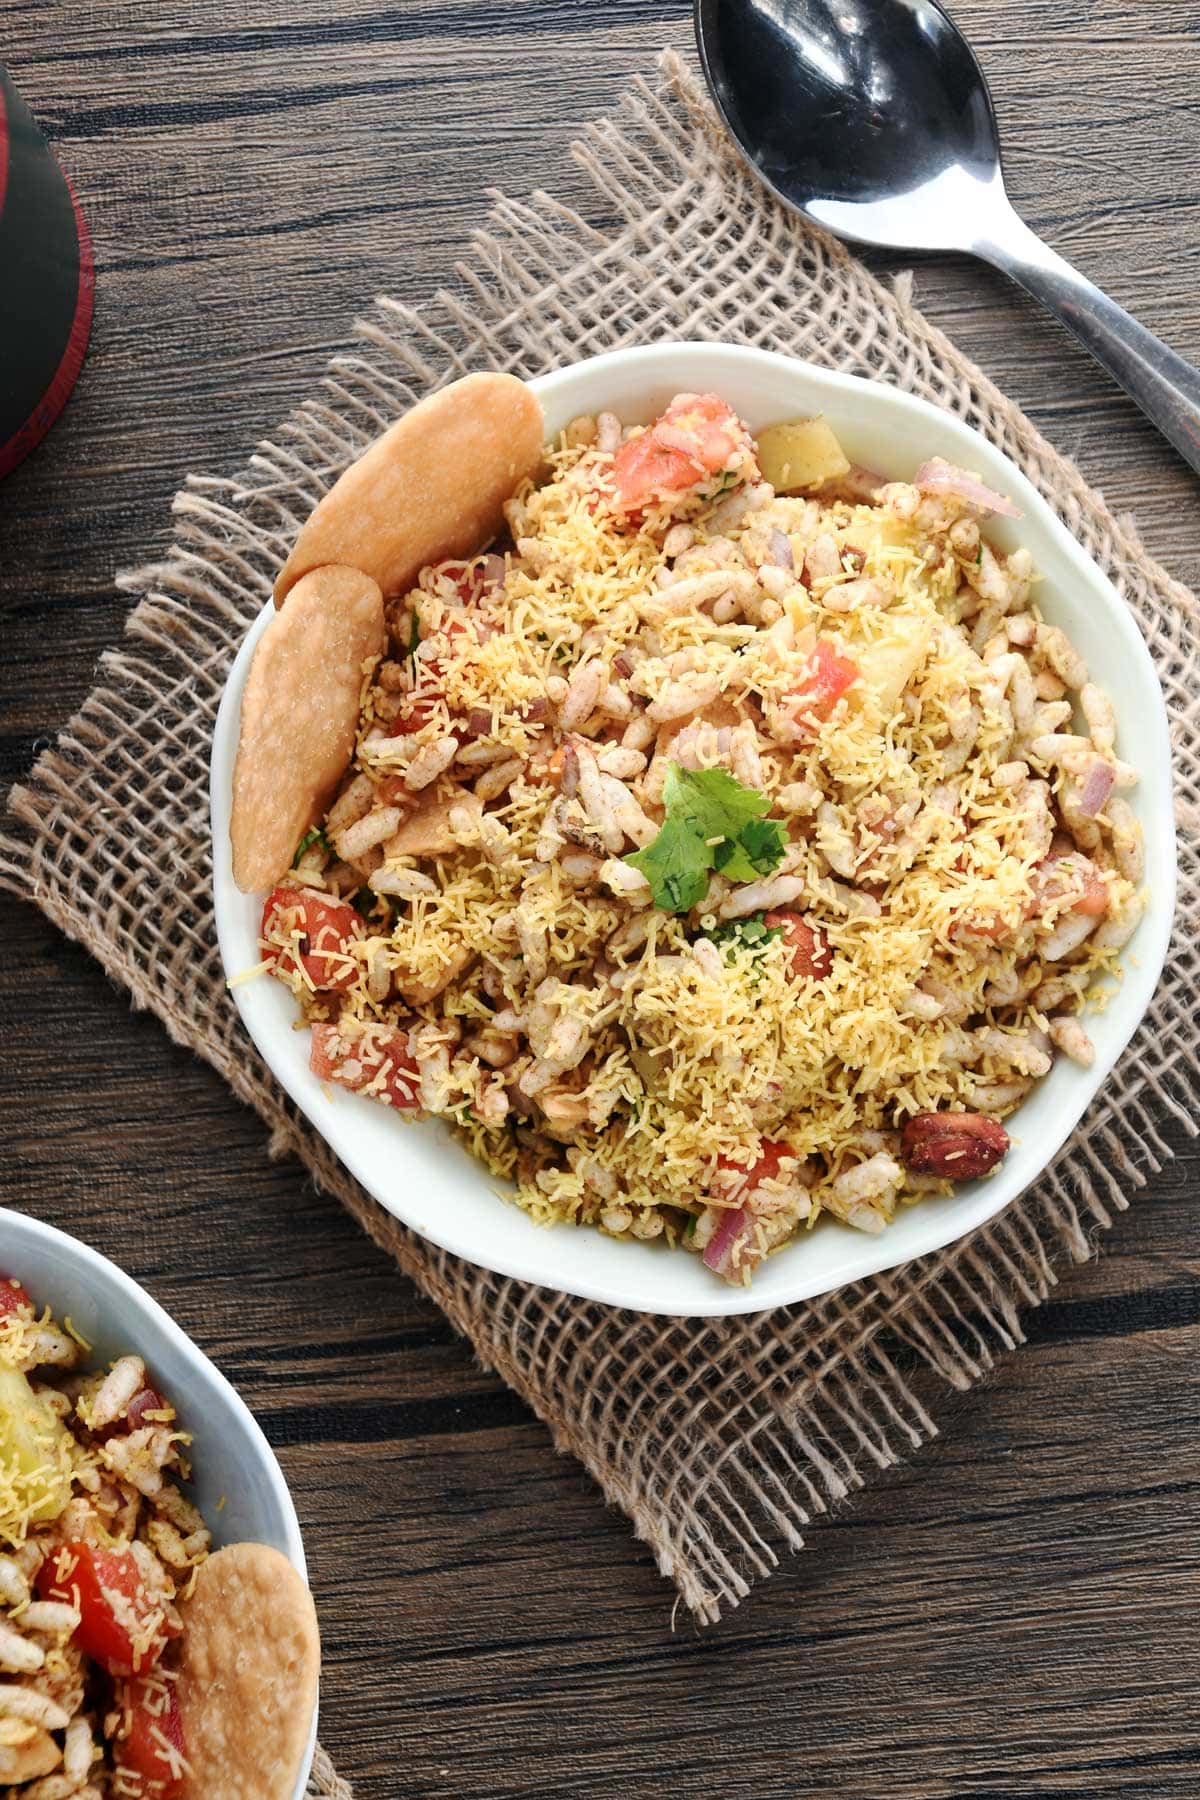 Bhel puri served in a bowl.